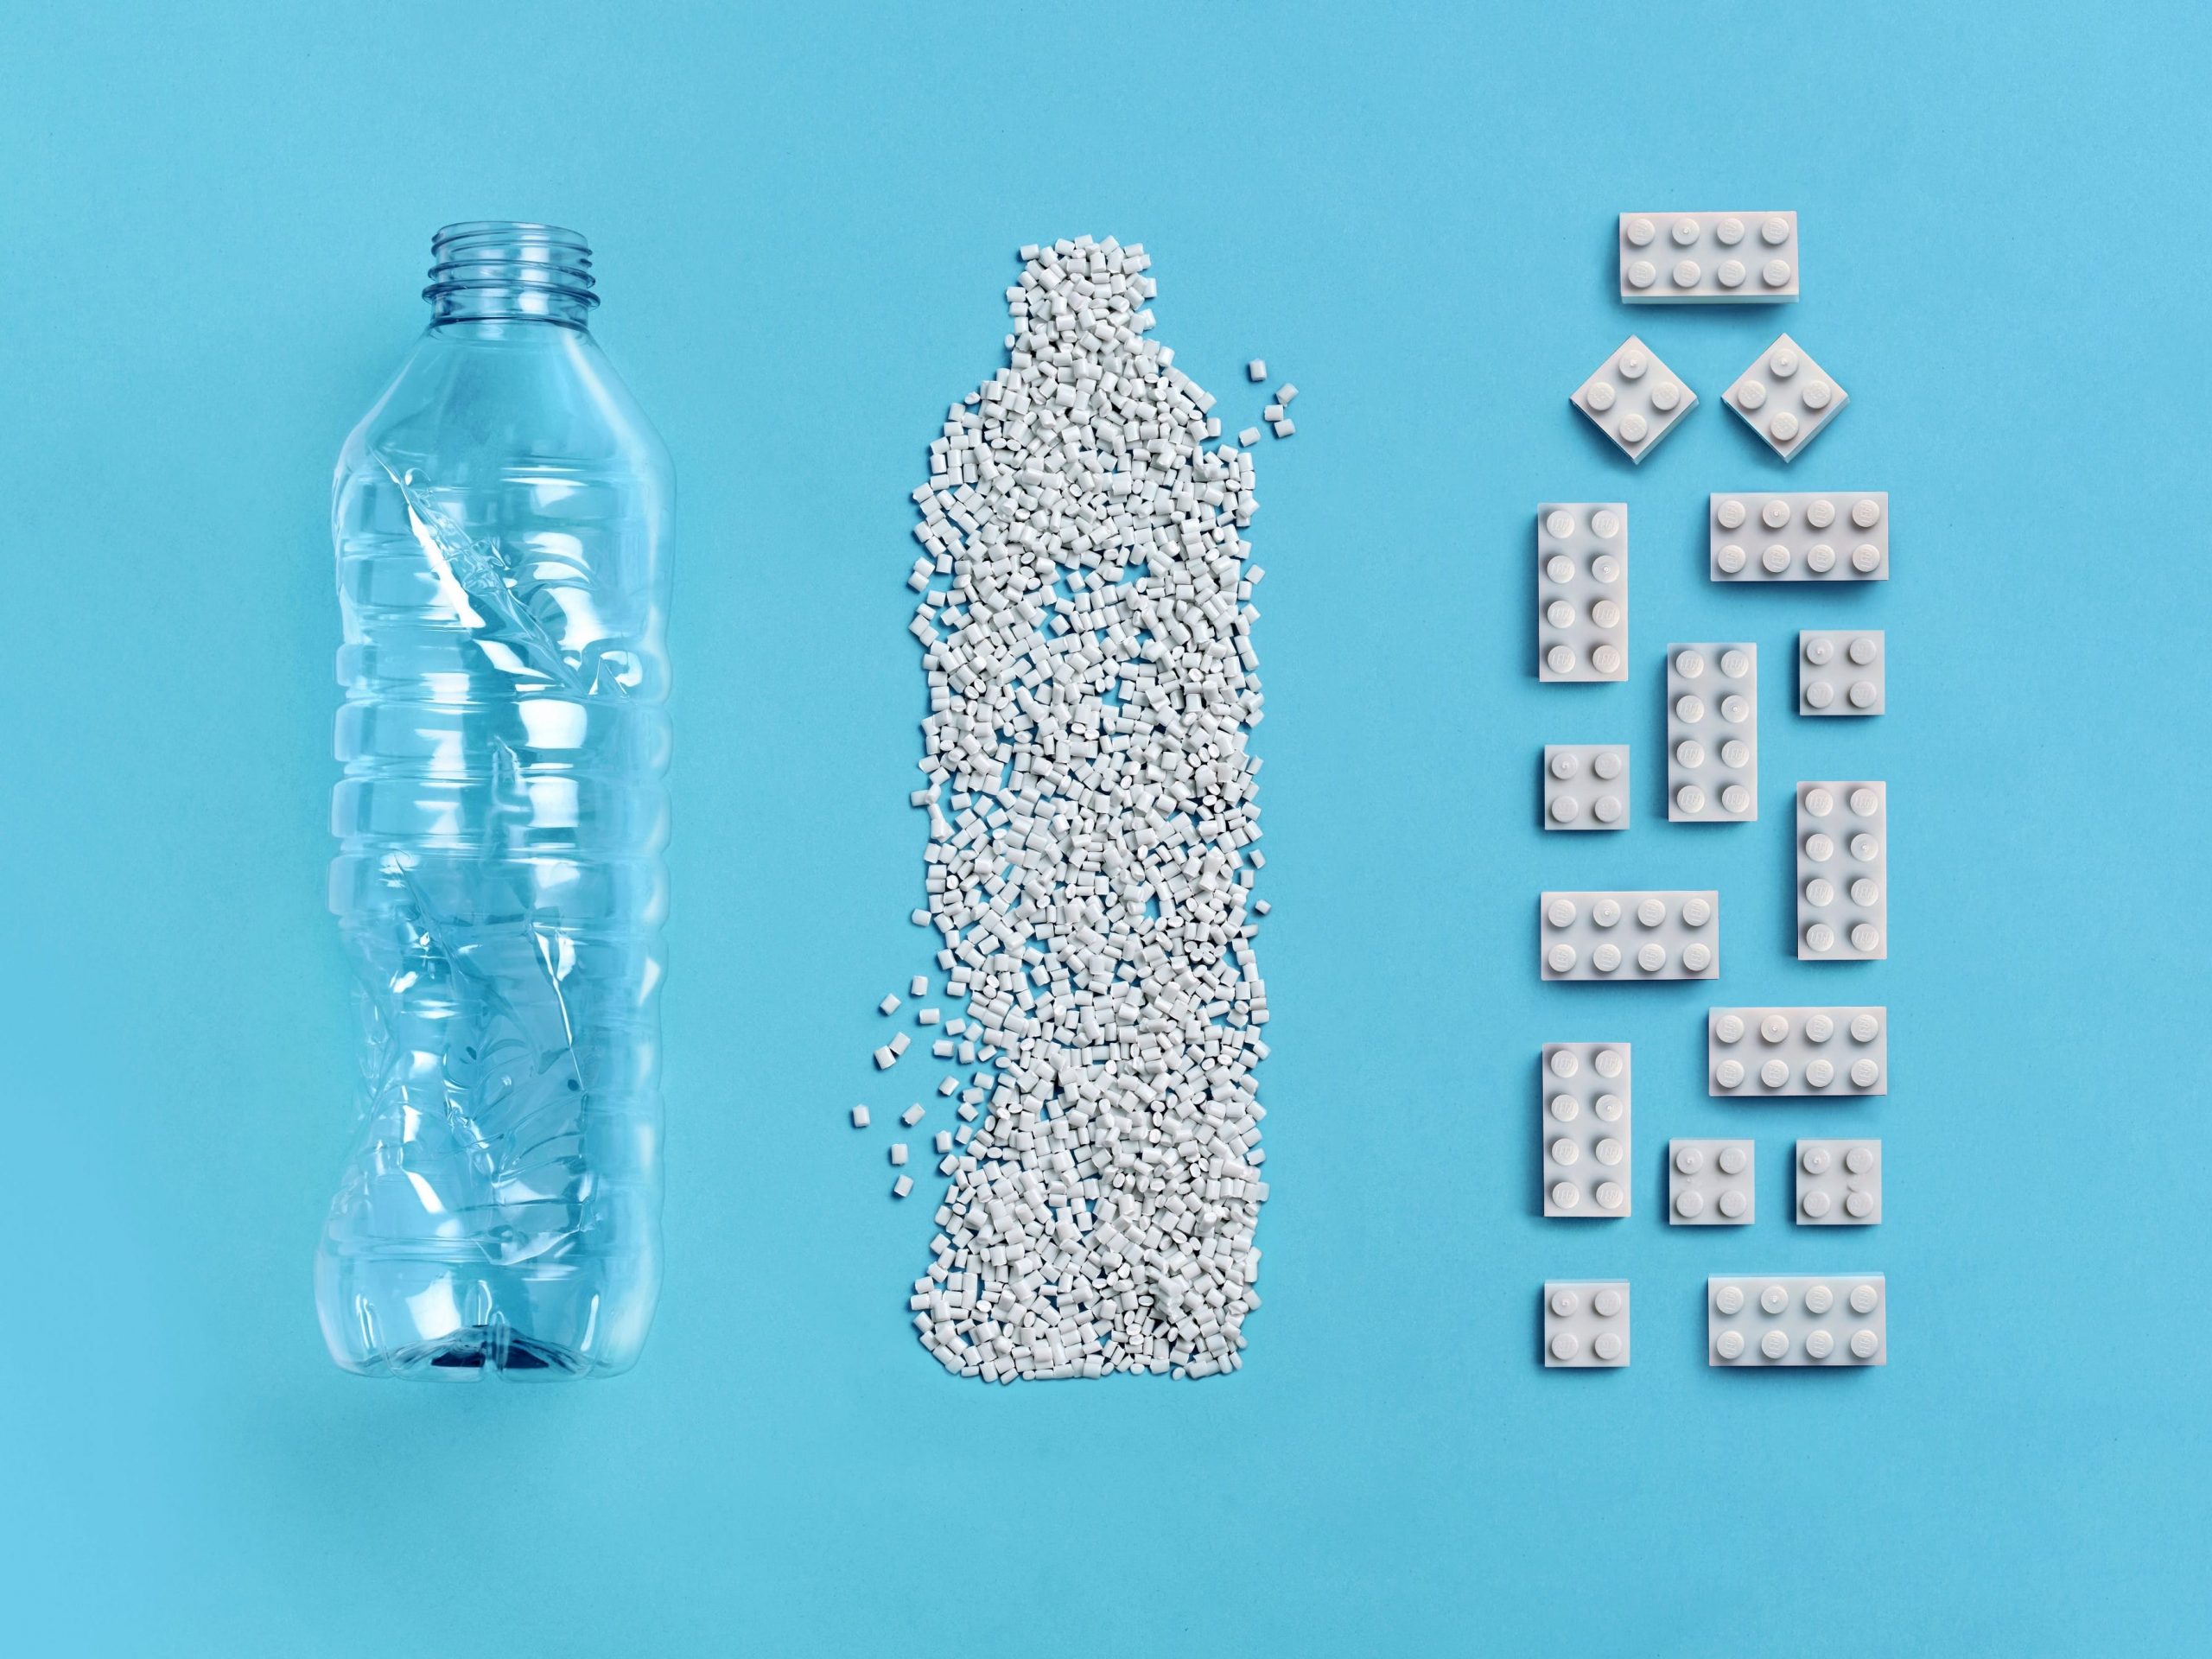 prototype LEGO bricks made from PET plastic from recycled bottles